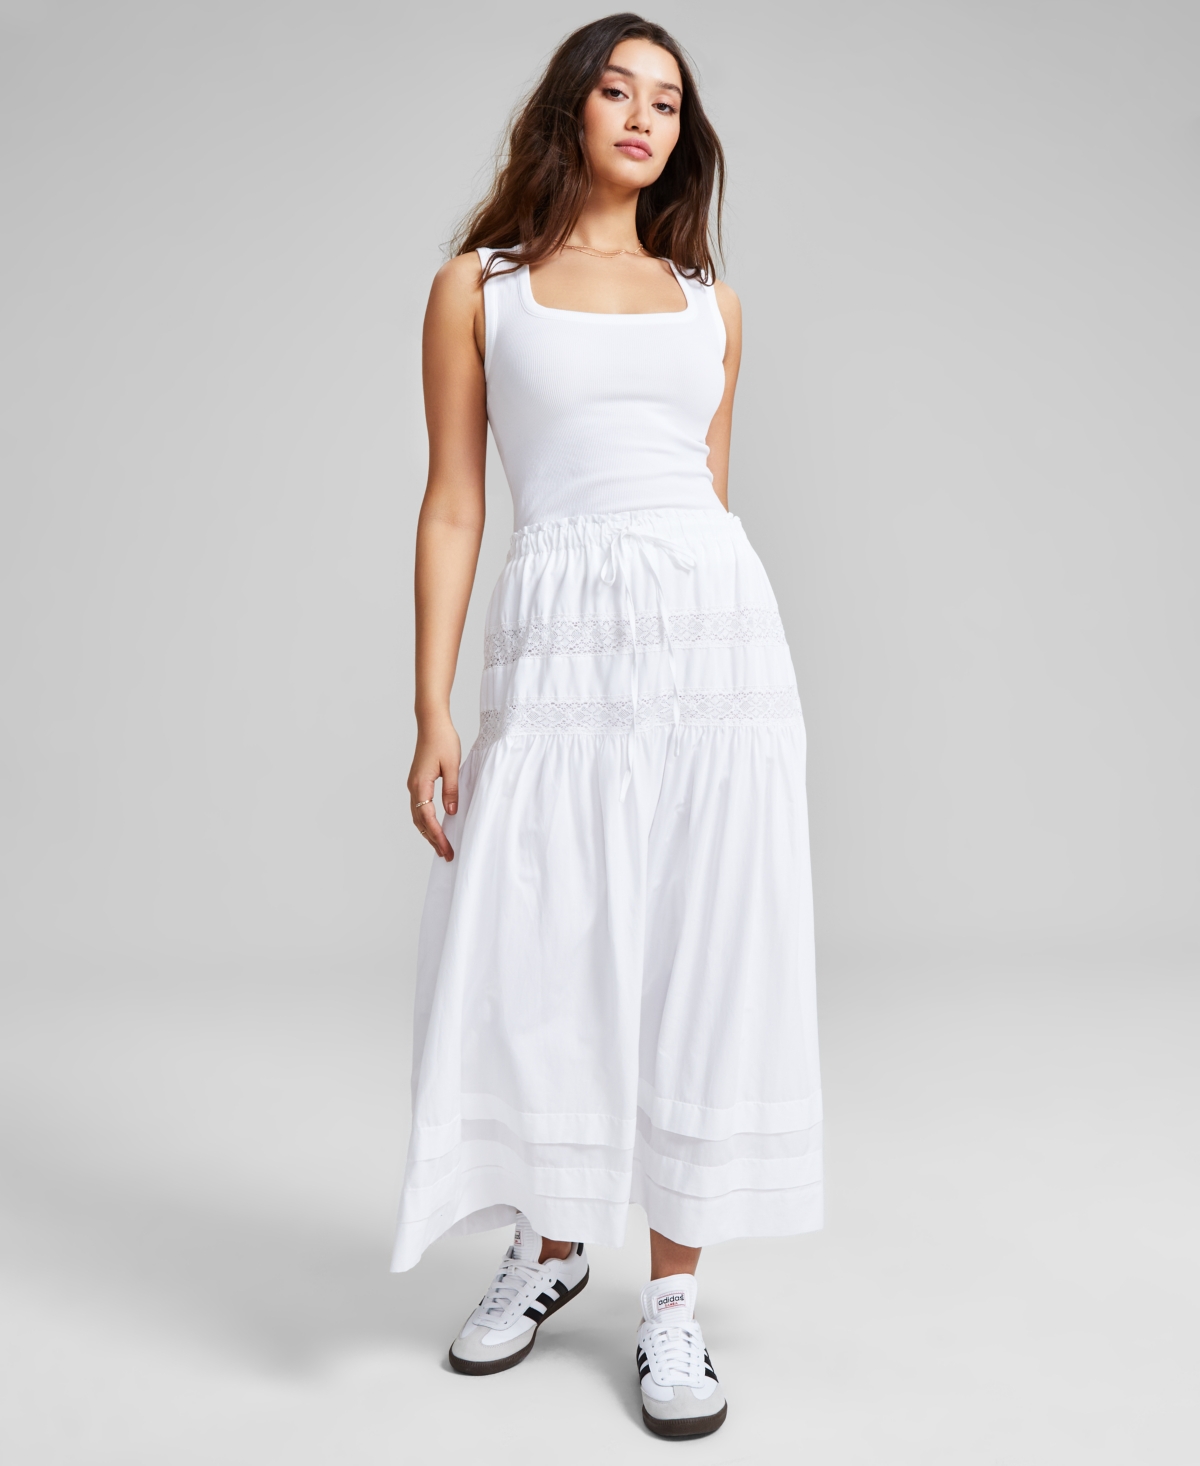 Women's Tie-Waist Lace-Inset Maxi Skirt, Created for Macy's - White